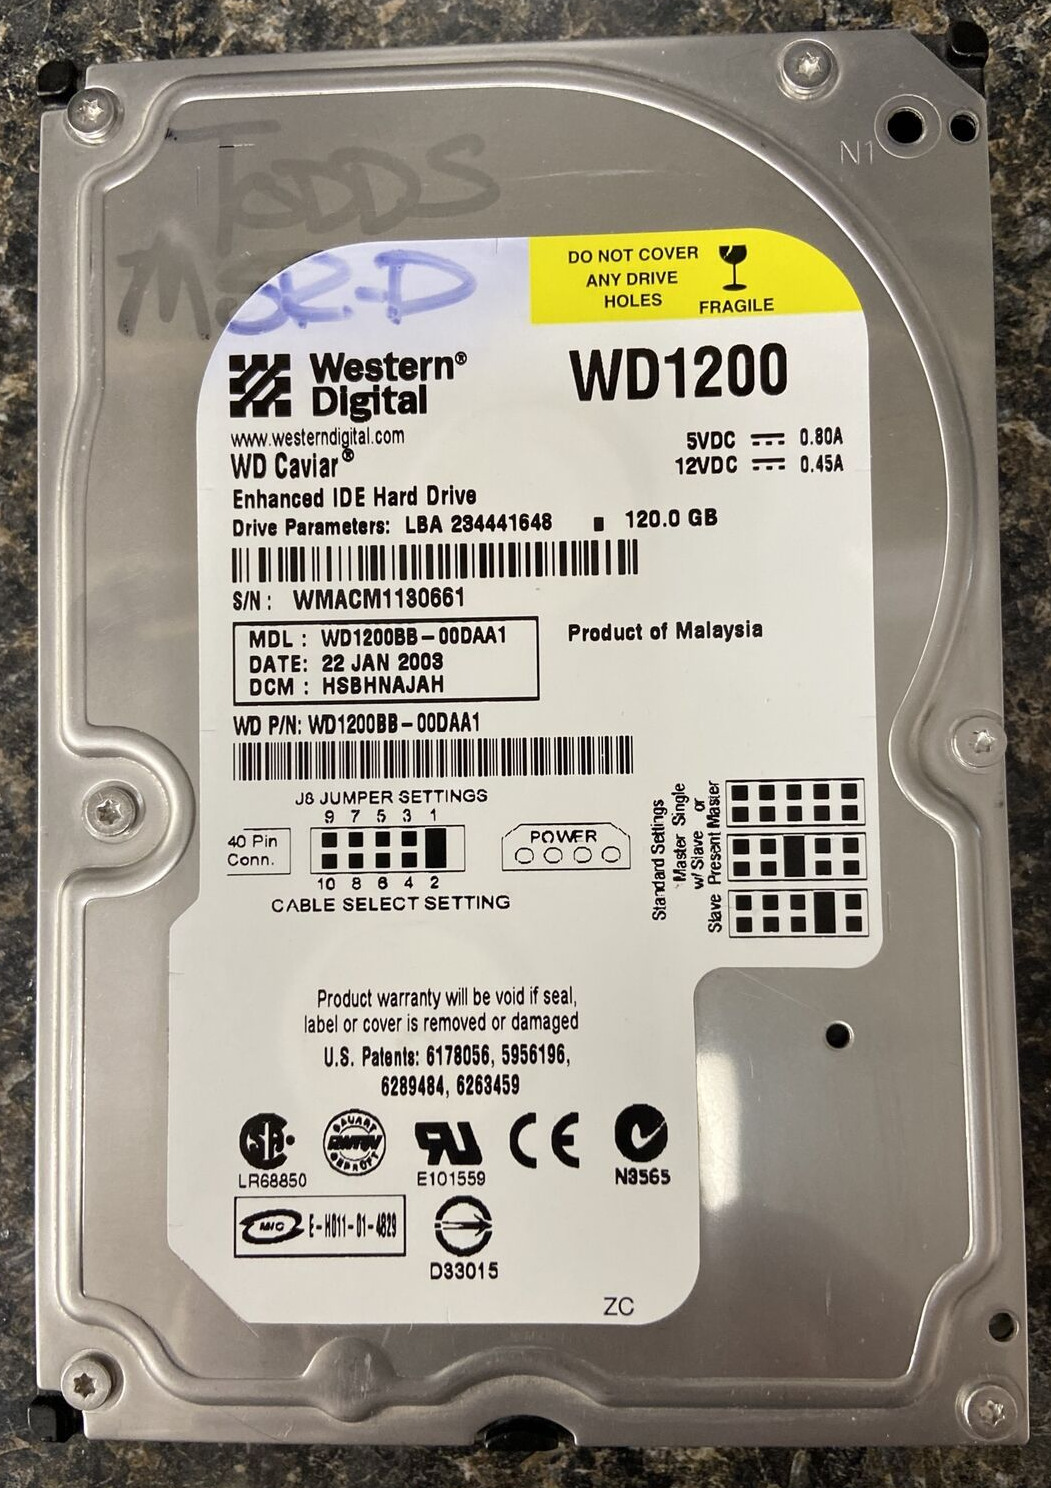 Western Digital WD1200 120GB WD1200BB-00DAA1 Passed Extended Diags, Zeroed, Mint